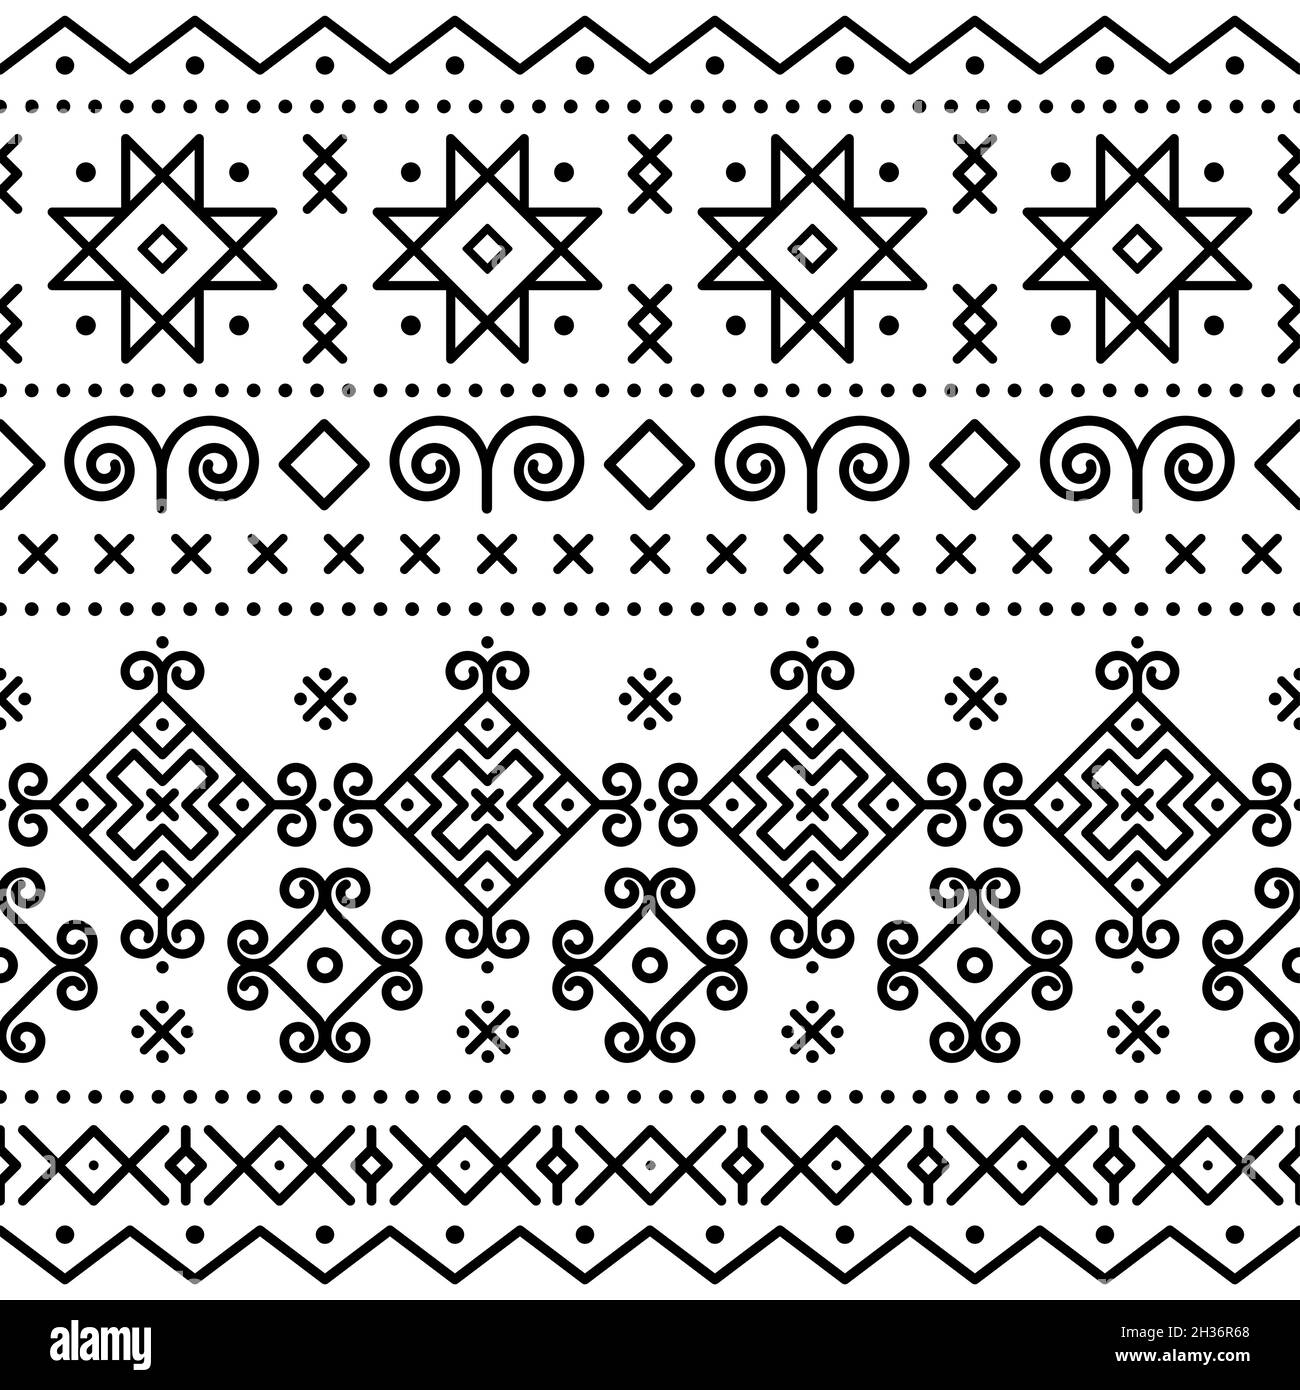 Traditional folk art vector seamless pattern inspired by an old painted houses in Cicmany, Slovakia, retro design with tribal geometric shapes in blac Stock Vector